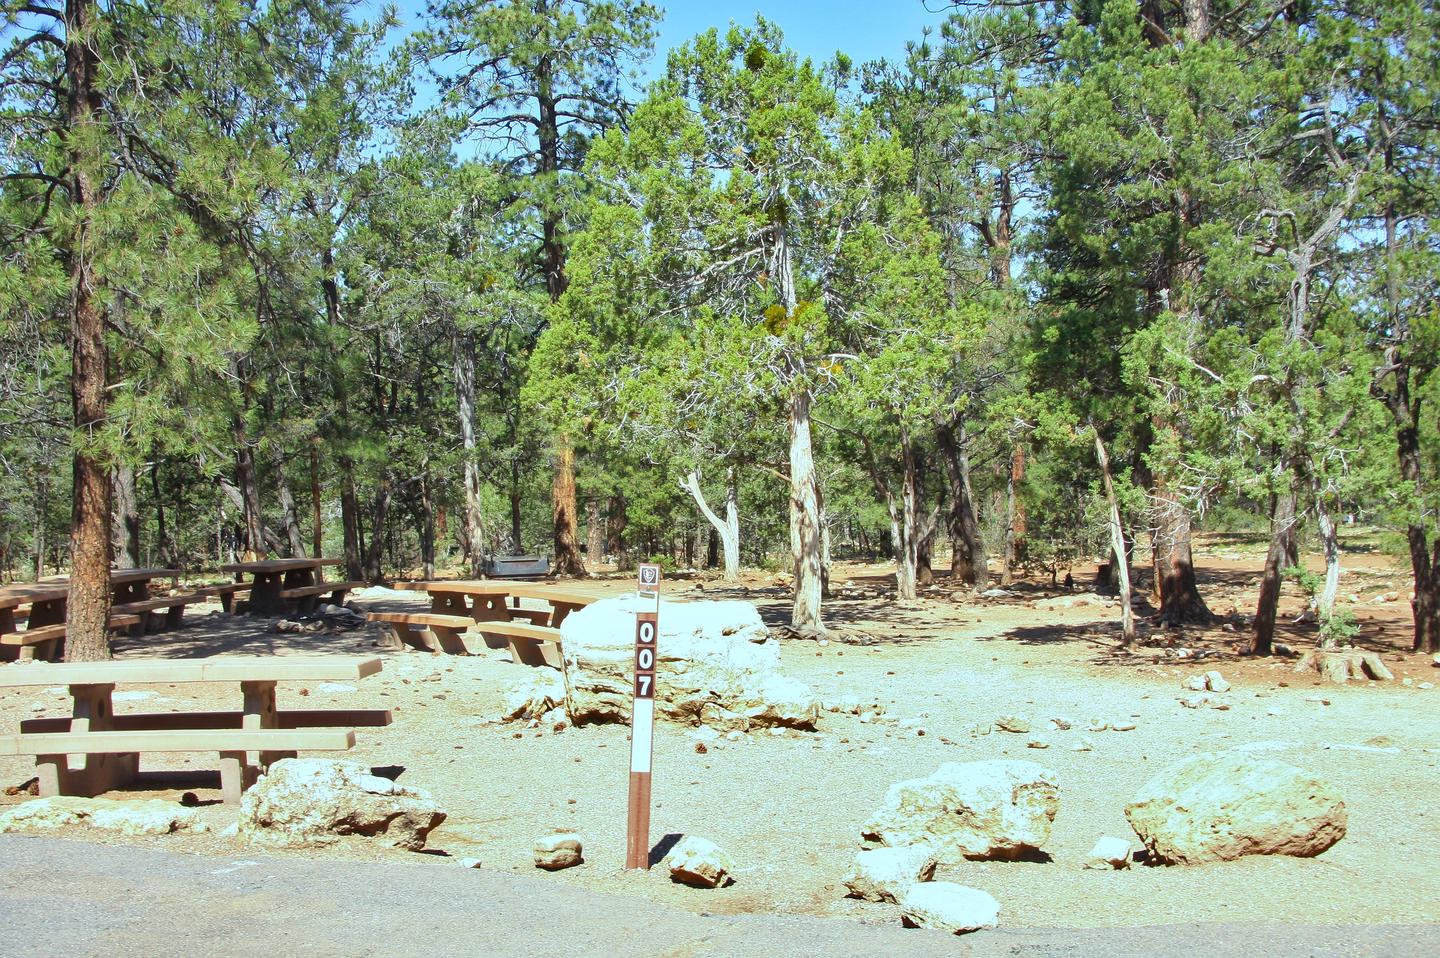 Picnic tables, fire pit, and parking spot, Mather Campground